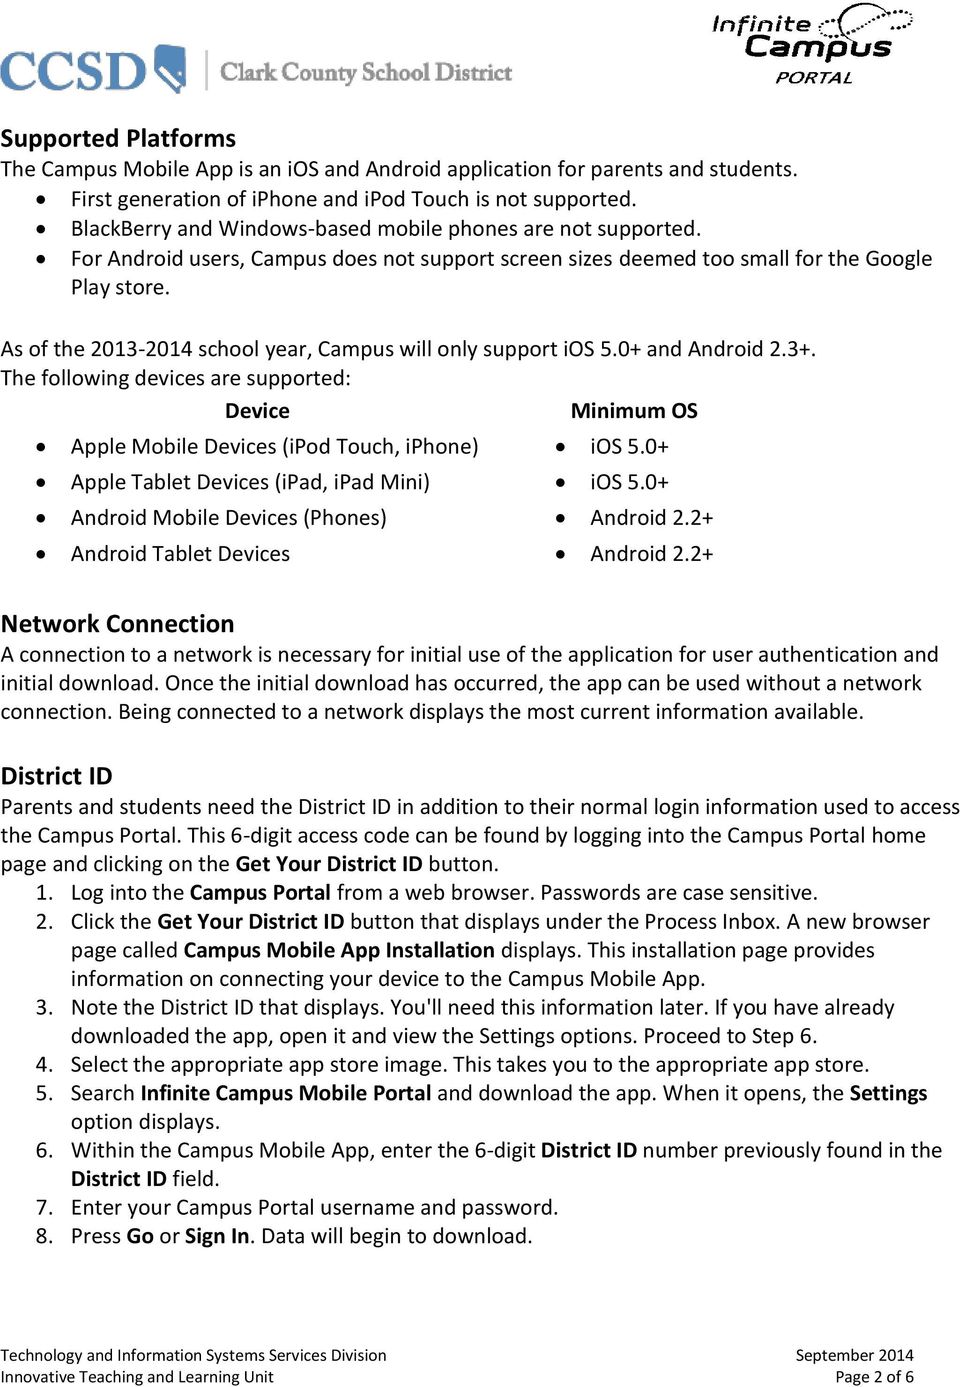 As of the 2013-2014 school year, Campus will only support ios 5.0+ and Android 2.3+. The following devices are supported: Device Minimum OS Apple Mobile Devices (ipod Touch, iphone) ios 5.